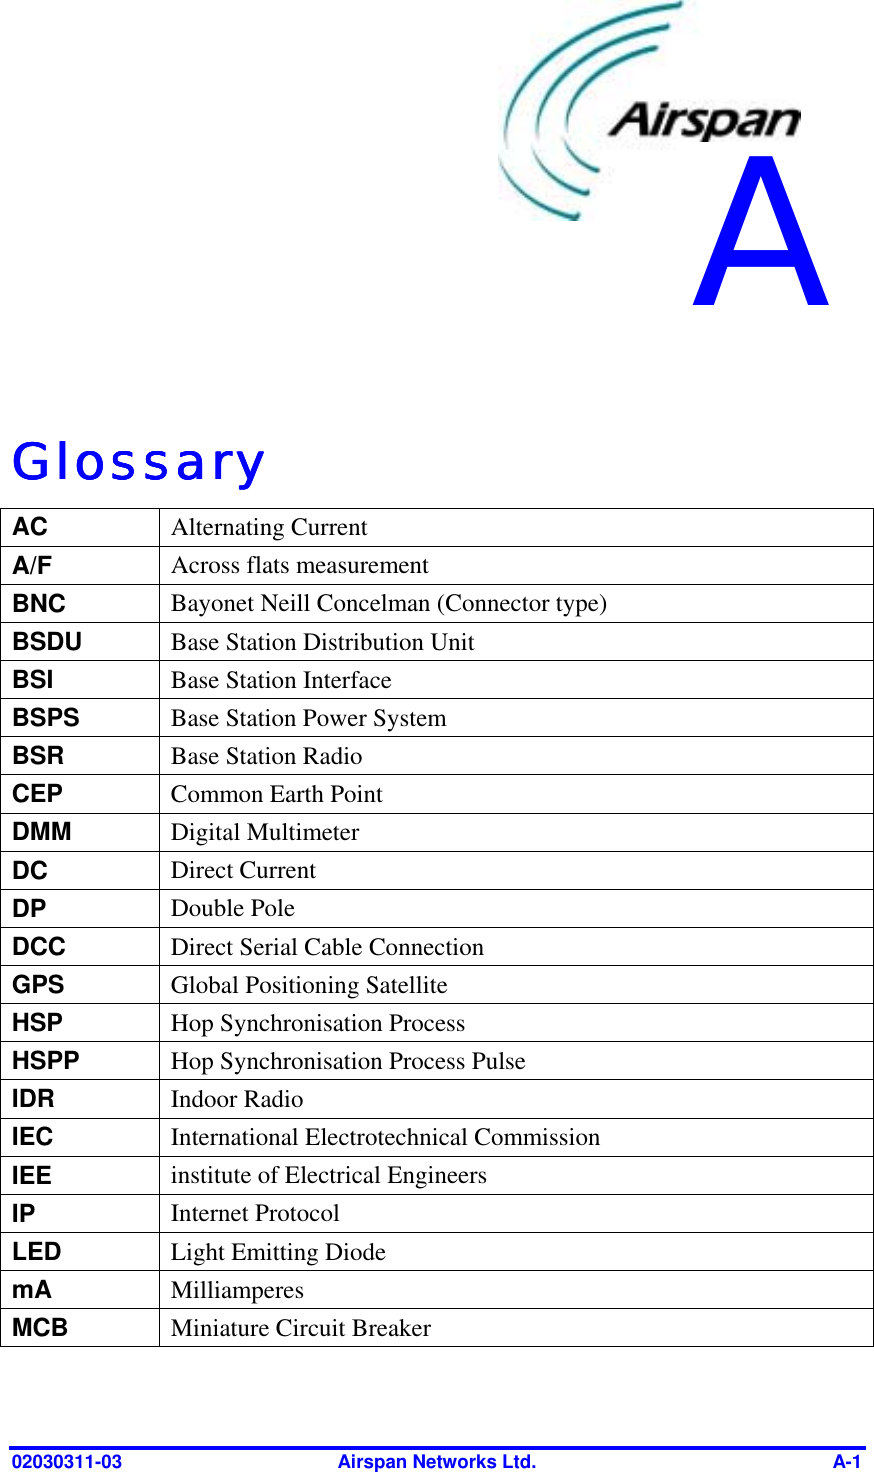  02030311-03  Airspan Networks Ltd.  A-1   GlossaryGlossaryGlossaryGlossary    AC  Alternating Current A/F   Across flats measurement BNC   Bayonet Neill Concelman (Connector type) BSDU  Base Station Distribution Unit BSI   Base Station Interface BSPS   Base Station Power System BSR   Base Station Radio CEP  Common Earth Point DMM   Digital Multimeter DC   Direct Current DP   Double Pole DCC  Direct Serial Cable Connection GPS   Global Positioning Satellite HSP   Hop Synchronisation Process HSPP   Hop Synchronisation Process Pulse IDR   Indoor Radio IEC   International Electrotechnical Commission IEE   institute of Electrical Engineers IP   Internet Protocol LED  Light Emitting Diode mA   Milliamperes MCB  Miniature Circuit Breaker A